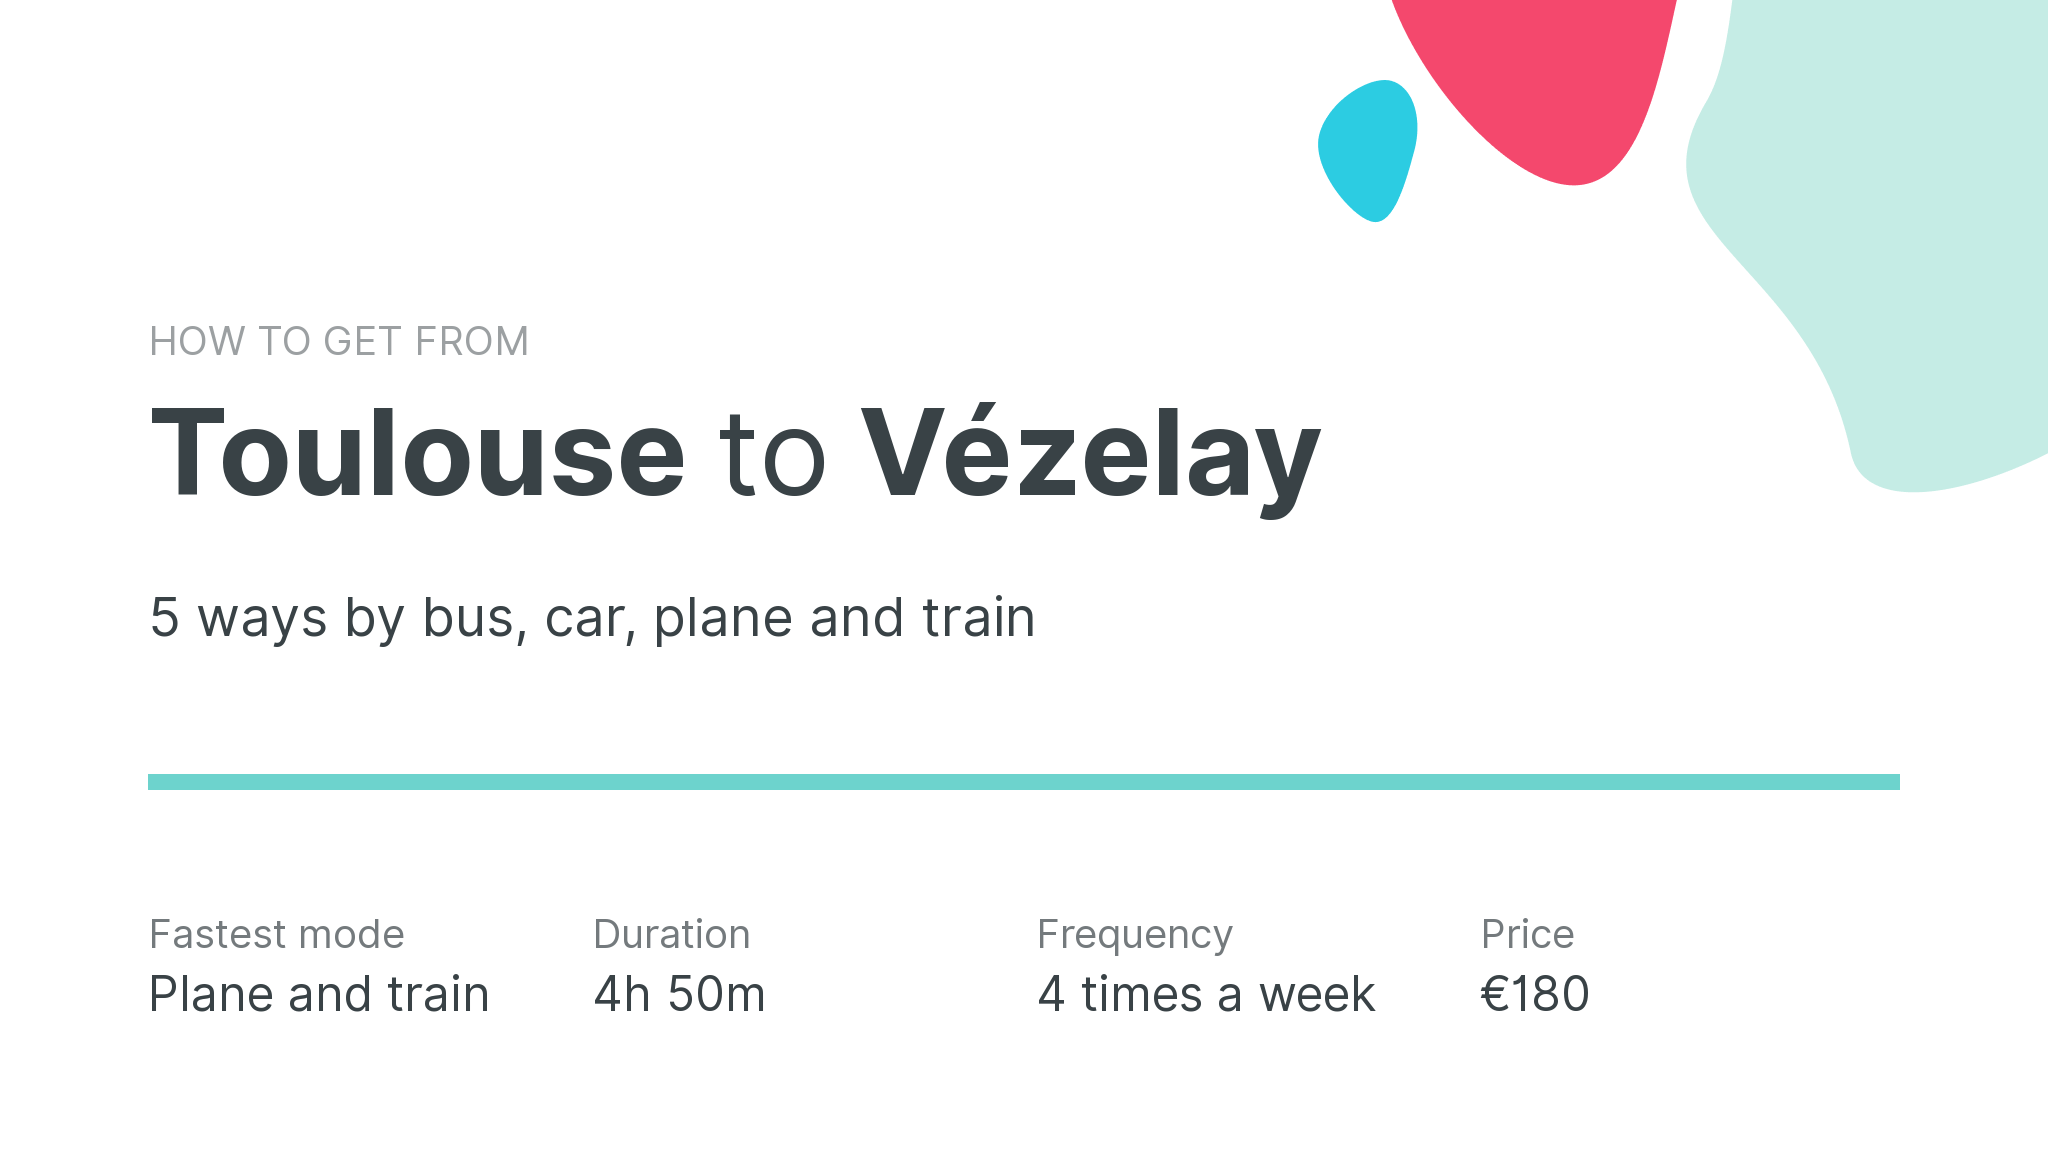 How do I get from Toulouse to Vézelay